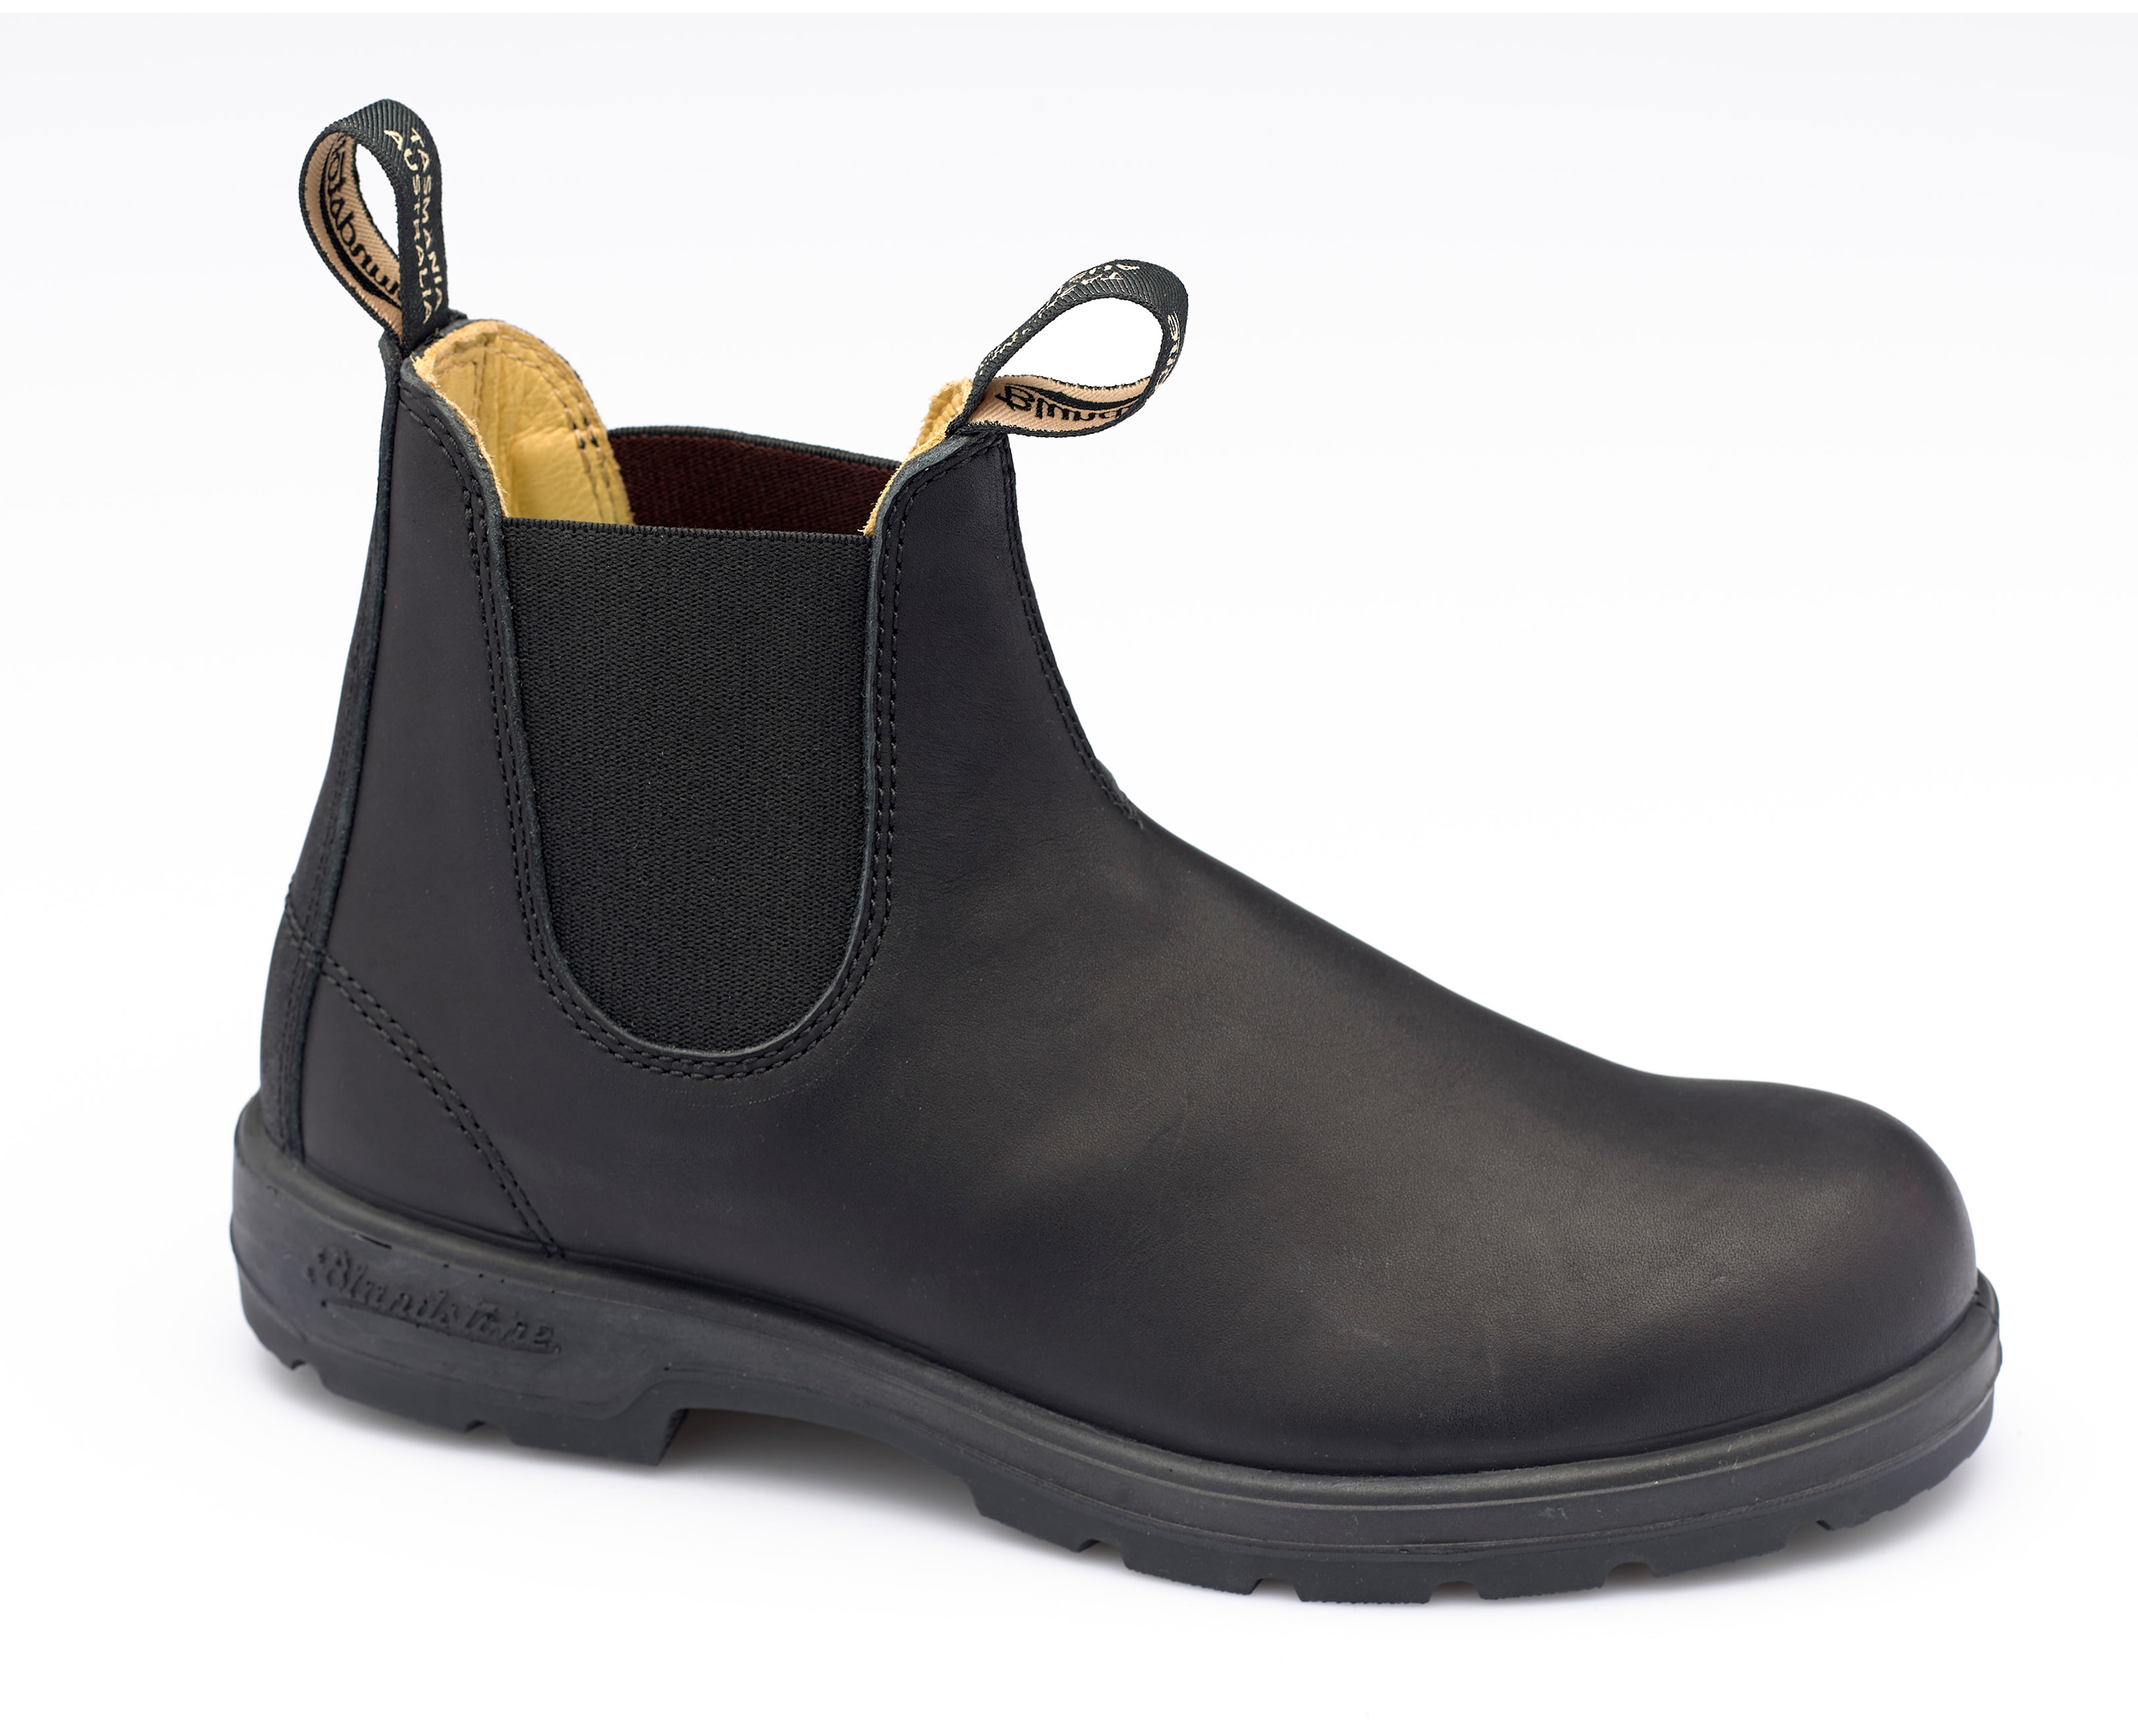 Blundstone 558 Classic Black Leather Boots